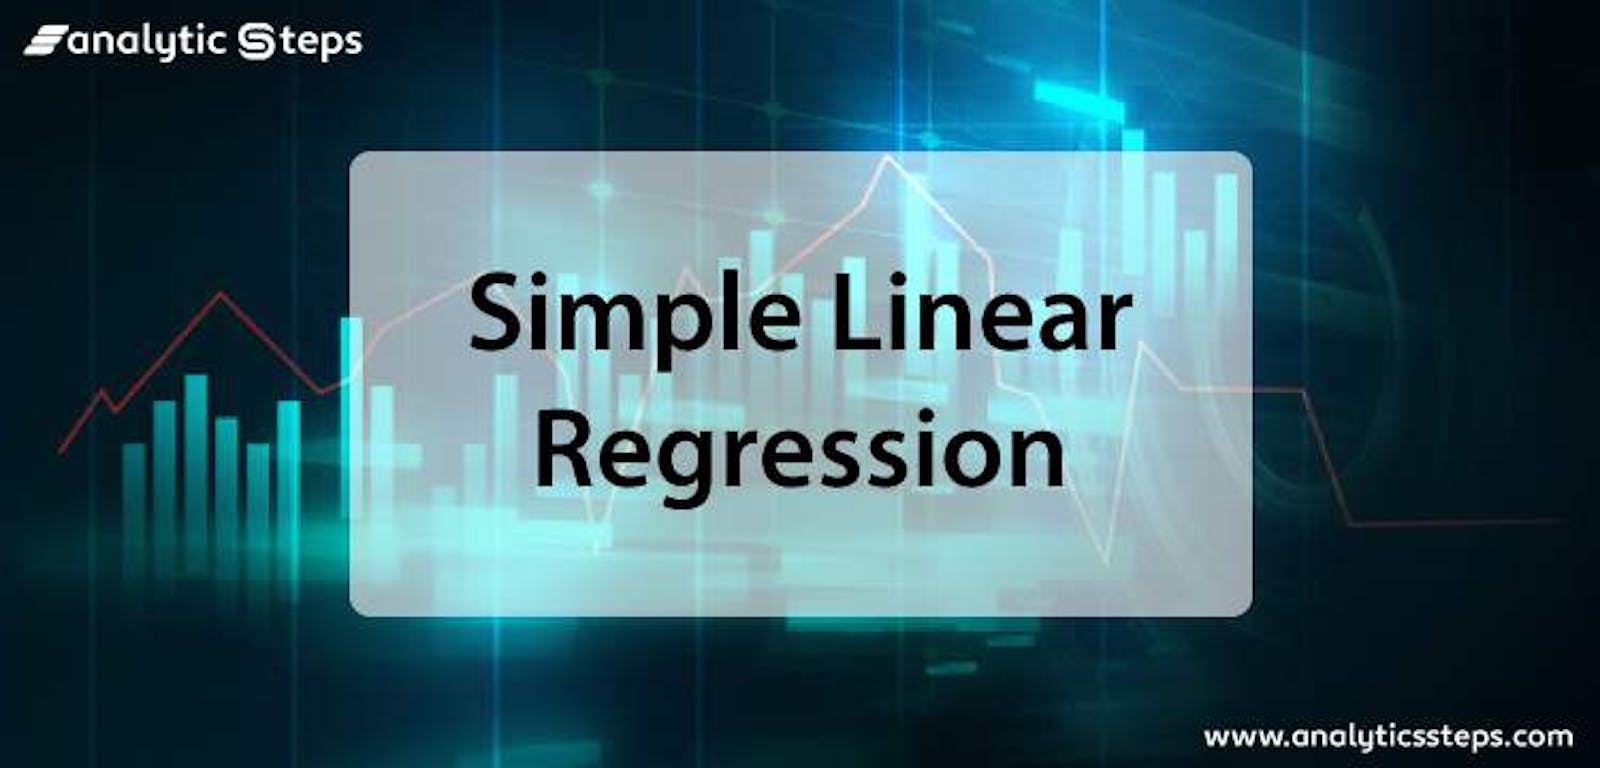 Using Linear Regression to Predict House Price